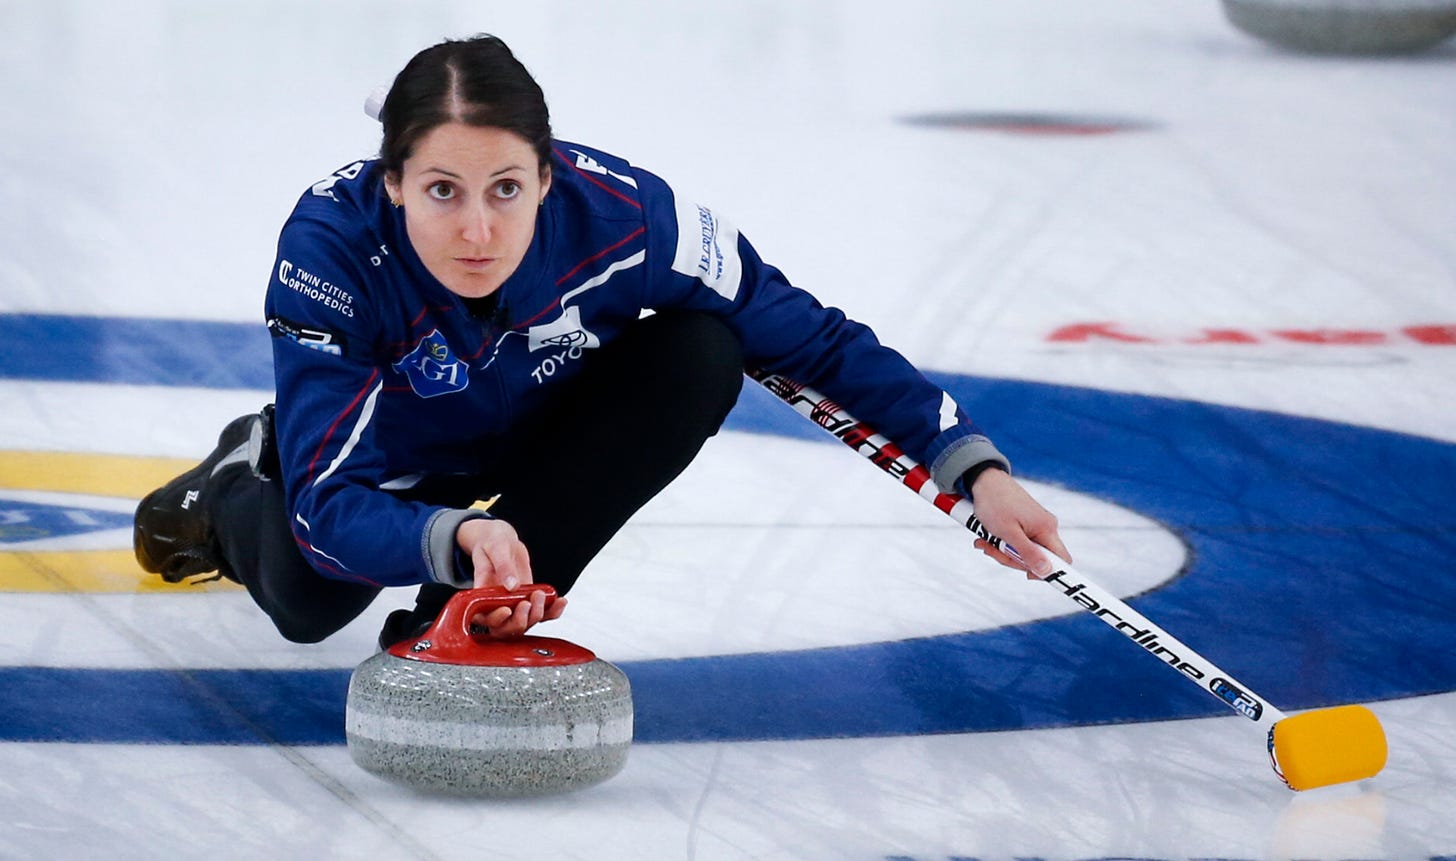 What to know about curling at the Beijing Olympics - The Washington Post